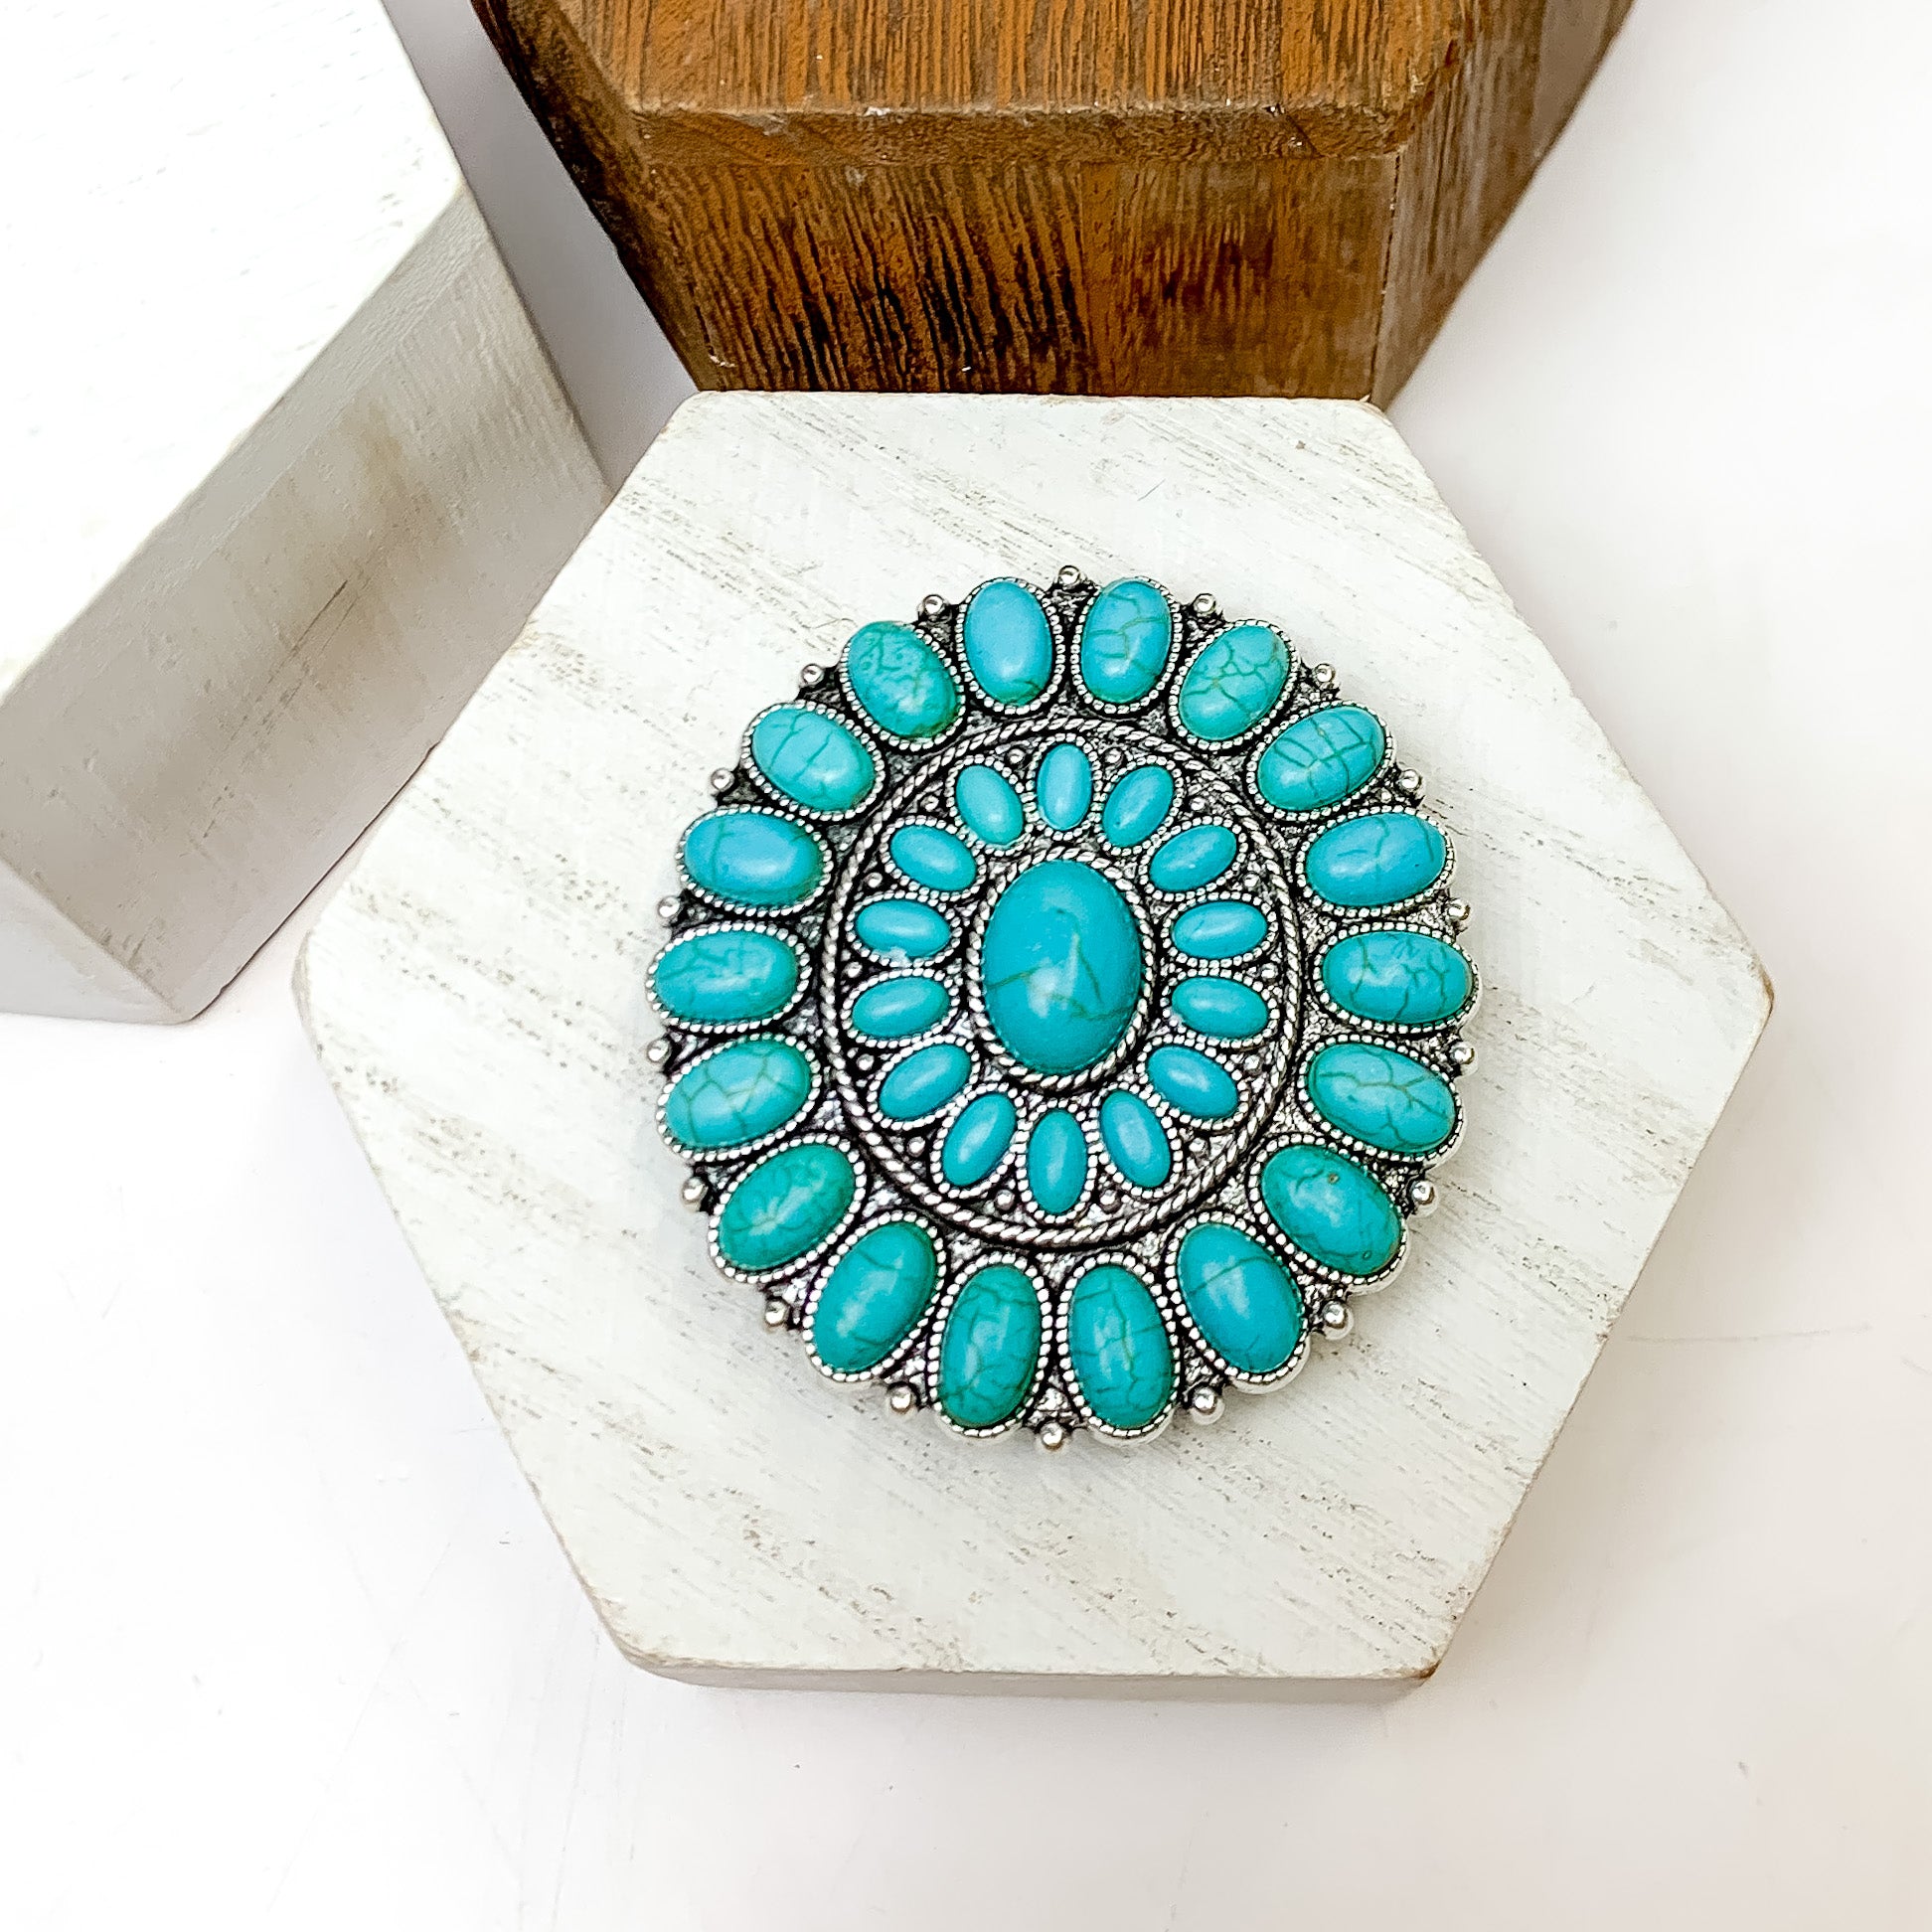 Silver Tone And Turquoise Stone Circle Phone Grip. This phone grip is pictured on a white block with a white background behind it.